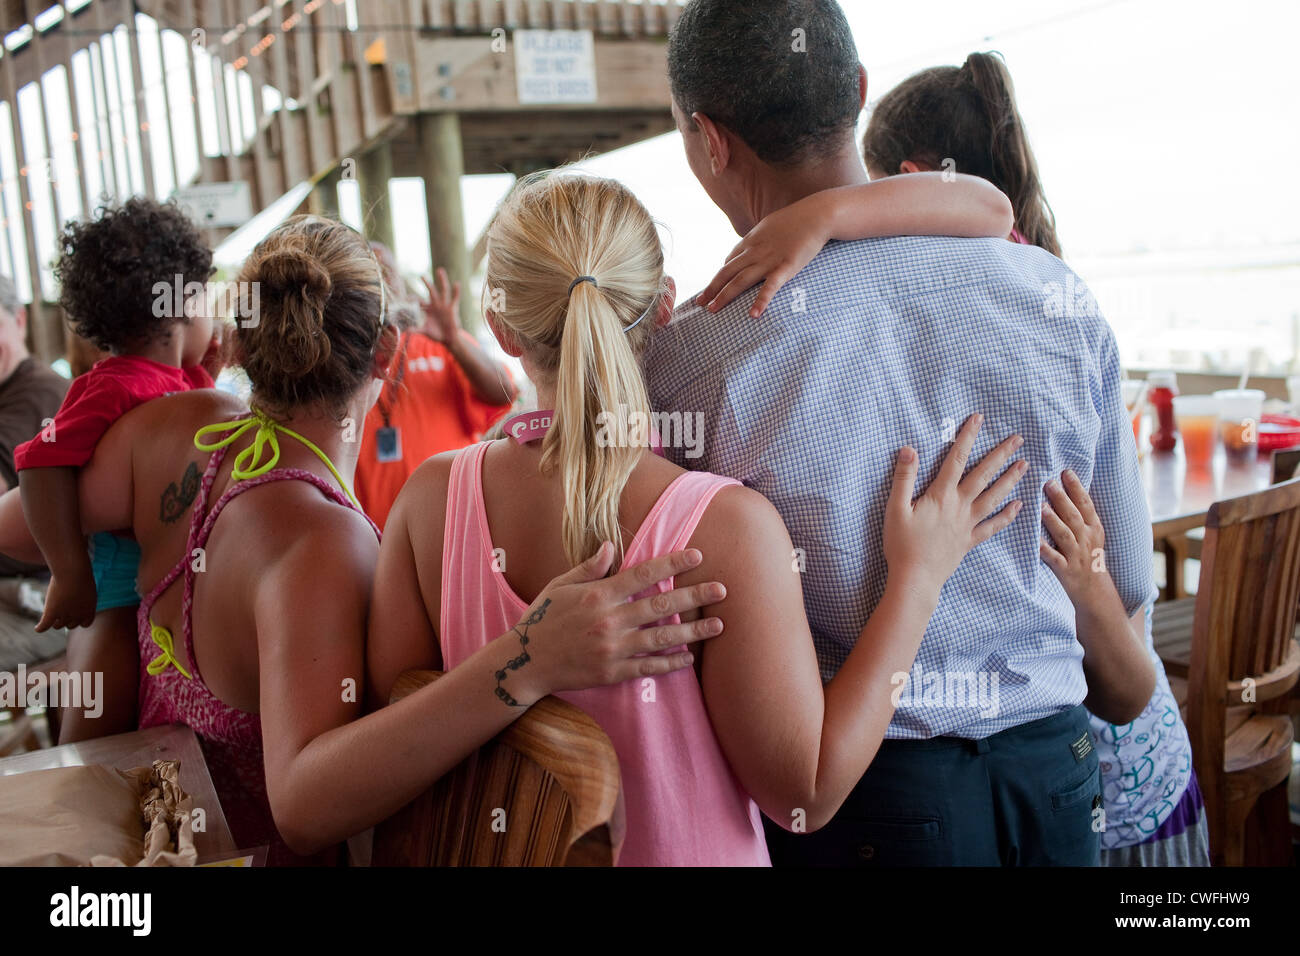 President Barack Obama poses for a picture with patrons at Tacky Jack's, a seafood restaurant in Orange Beach, Ala., June 14, 20 Stock Photo